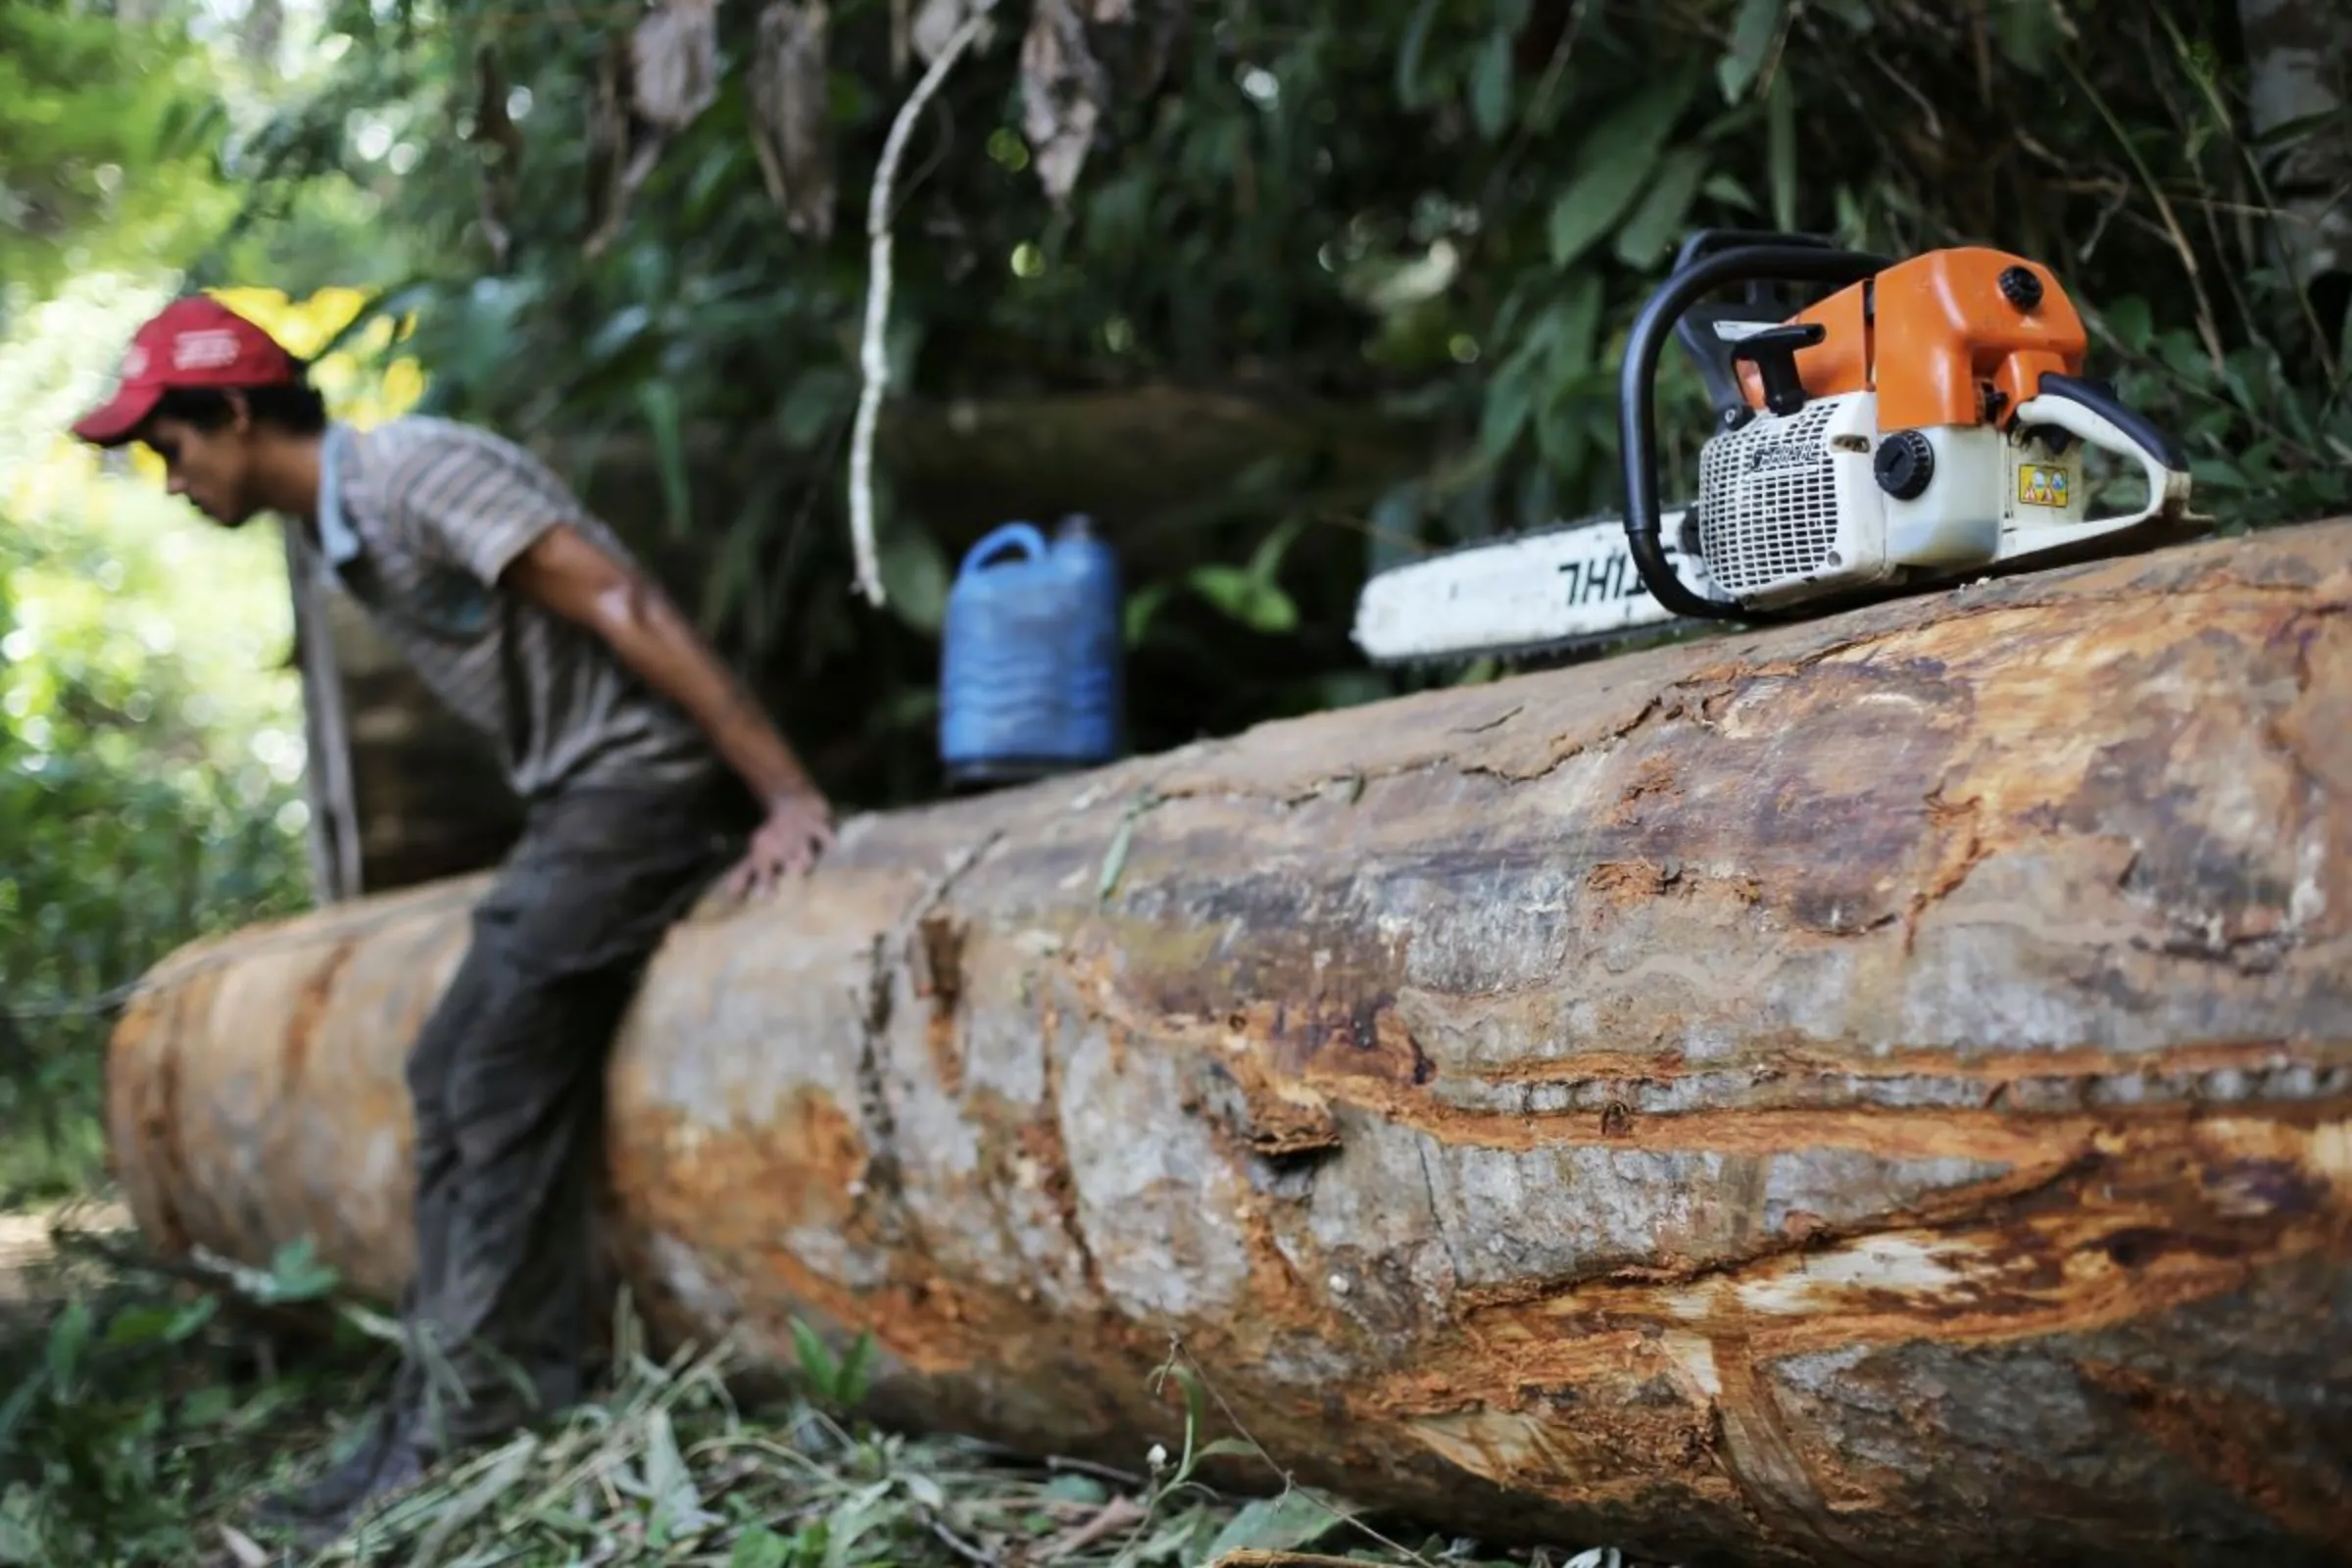 A man, who was hired by loggers to cut trees from the Amazon rainforest, sits on a tree next to his chainsaw in Jamanxim National Park, Para State, Brazil June 21, 2013. REUTERS/Nacho Doce